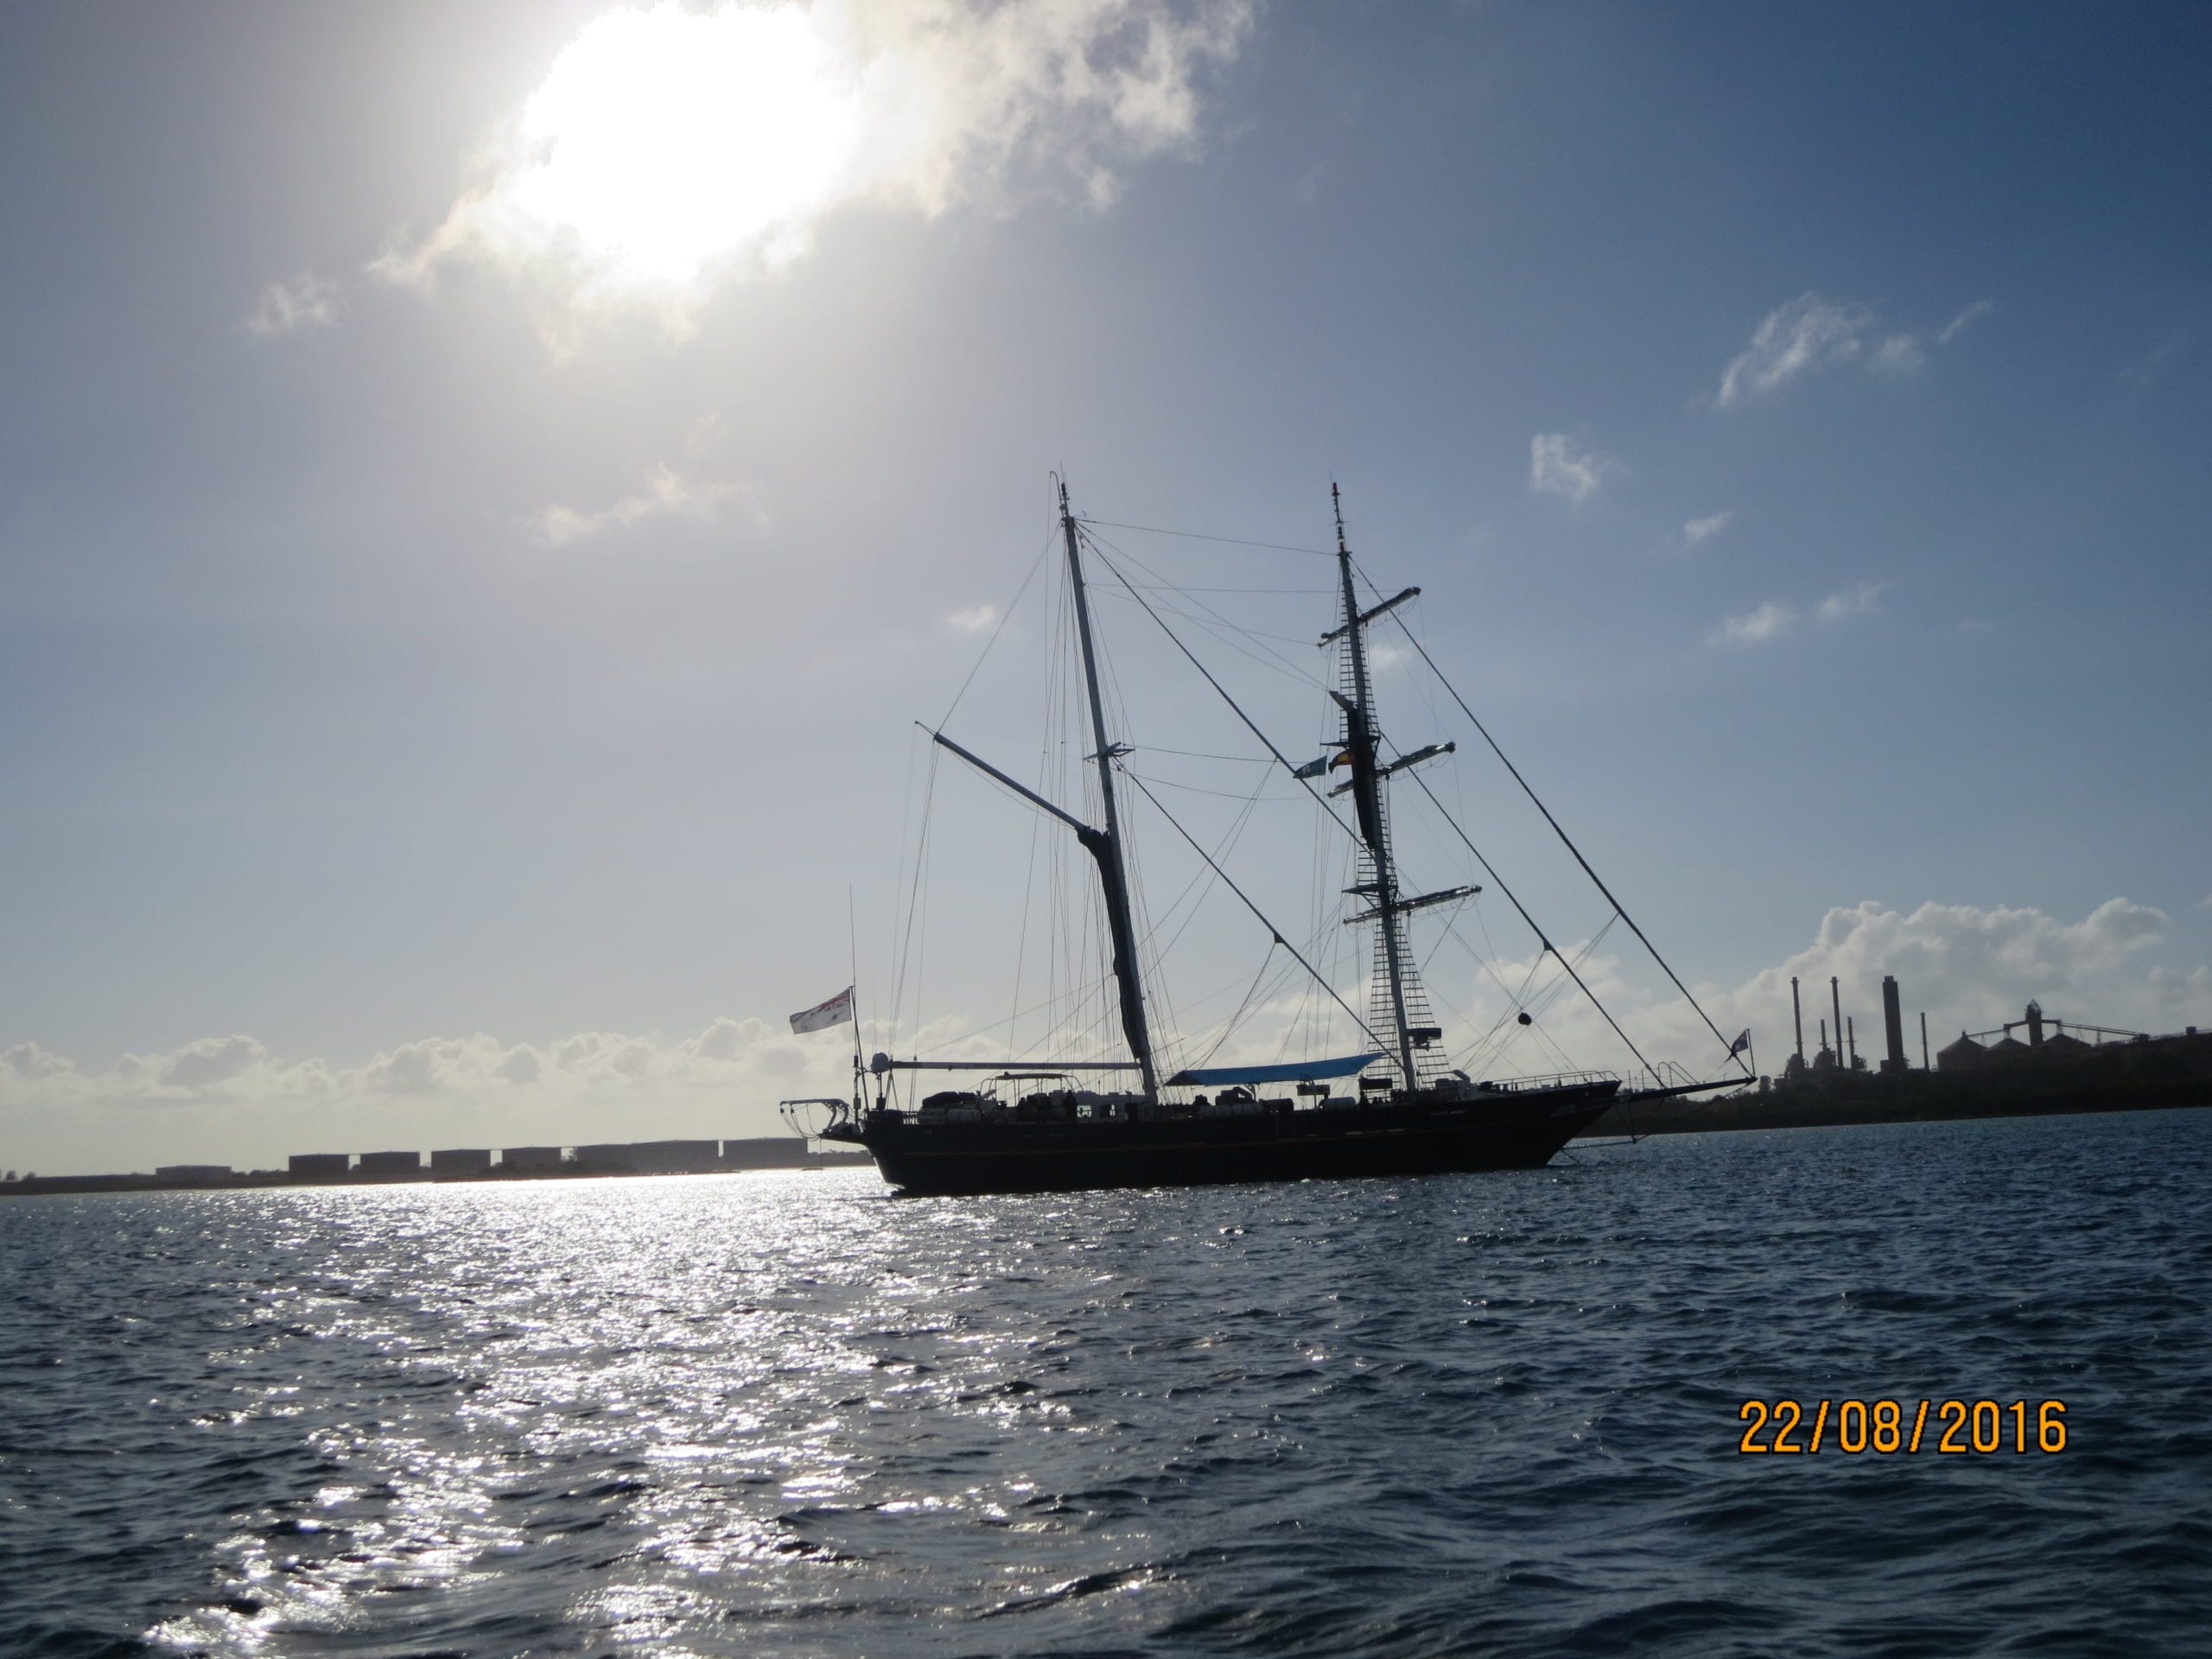 The young endeavour has two masts and is a lot bigger than an international cadet.